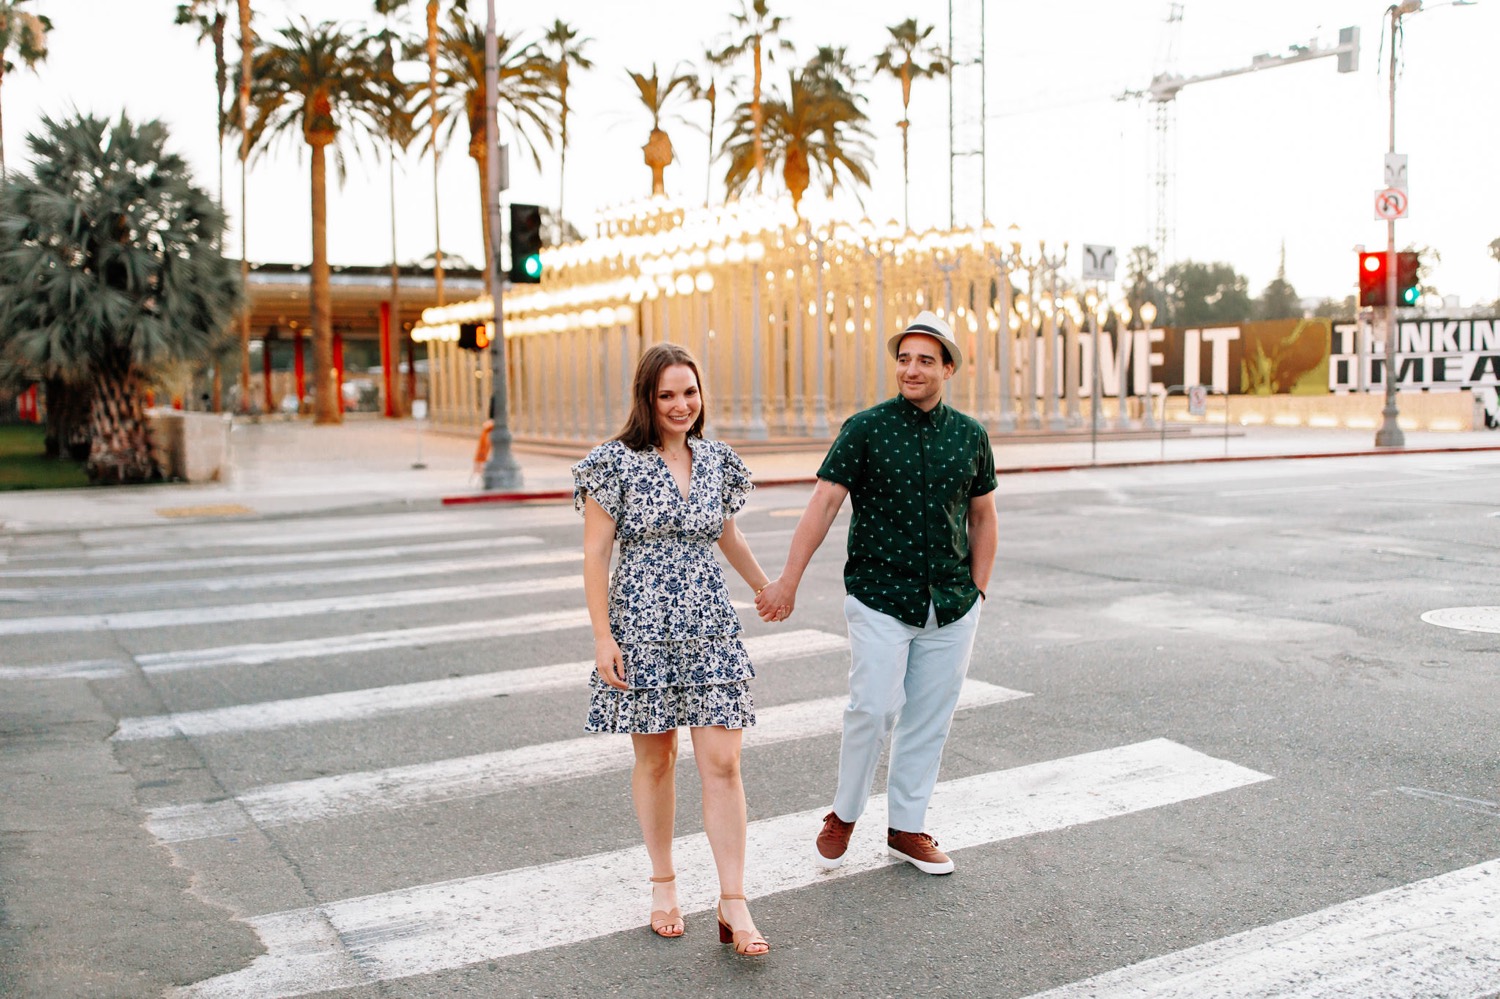 Los Angeles engagement photo locations